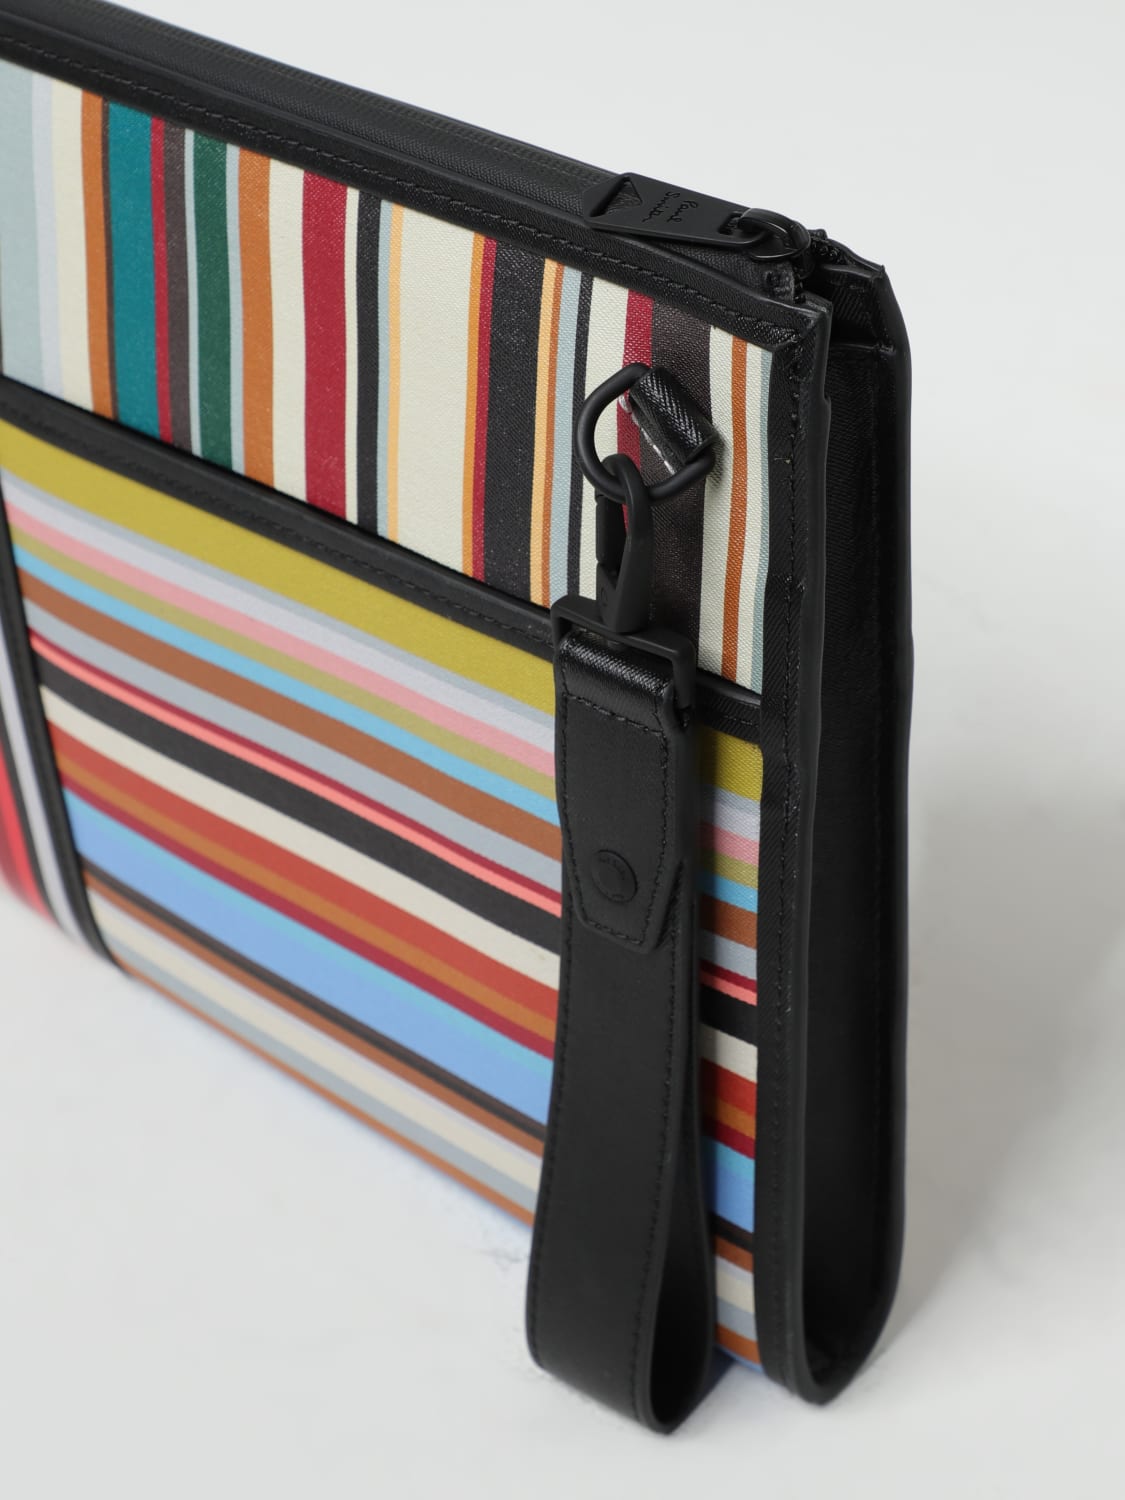 Paul Smith Bags for Men - Vestiaire Collective